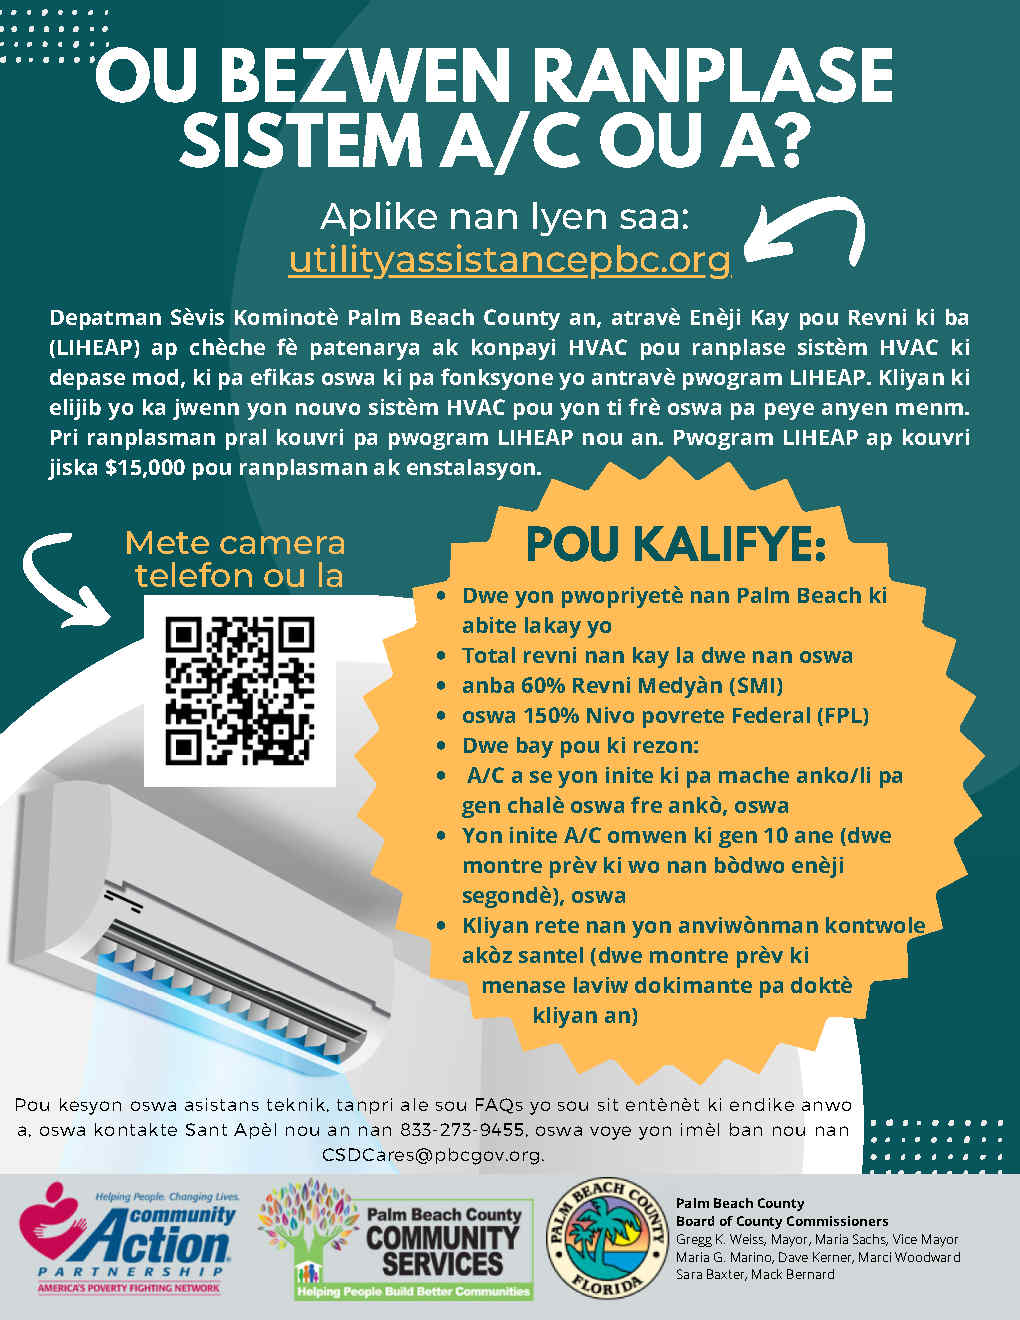 Rental Assistance Flyer in CREOLE